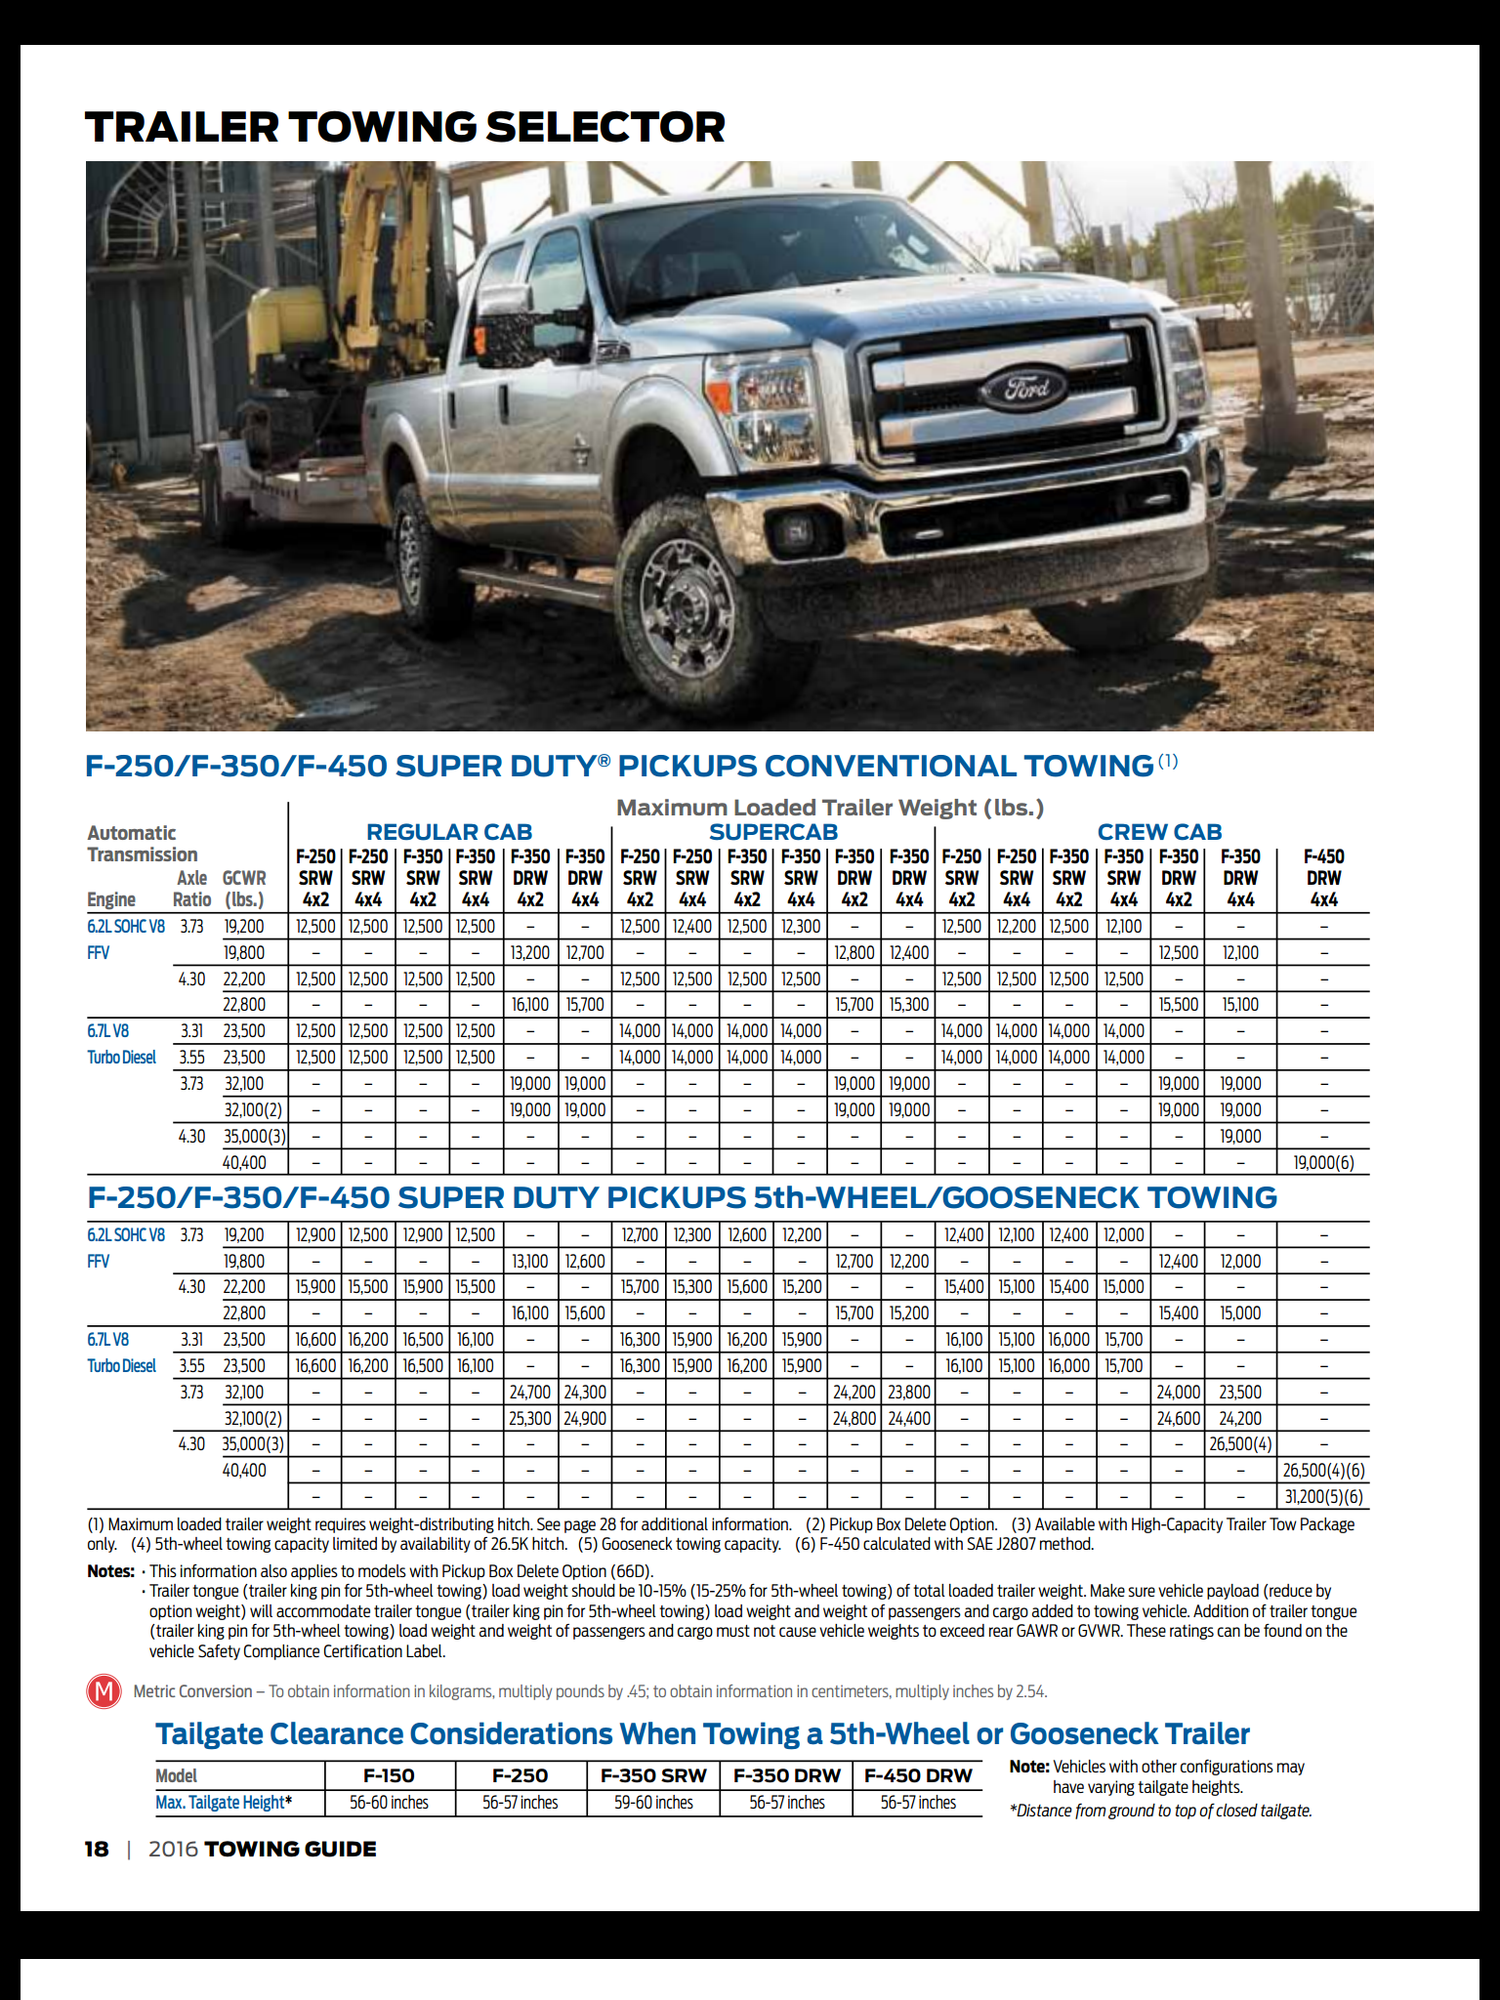 2009 Ford F250 Super Duty 5.4 Towing Capacity